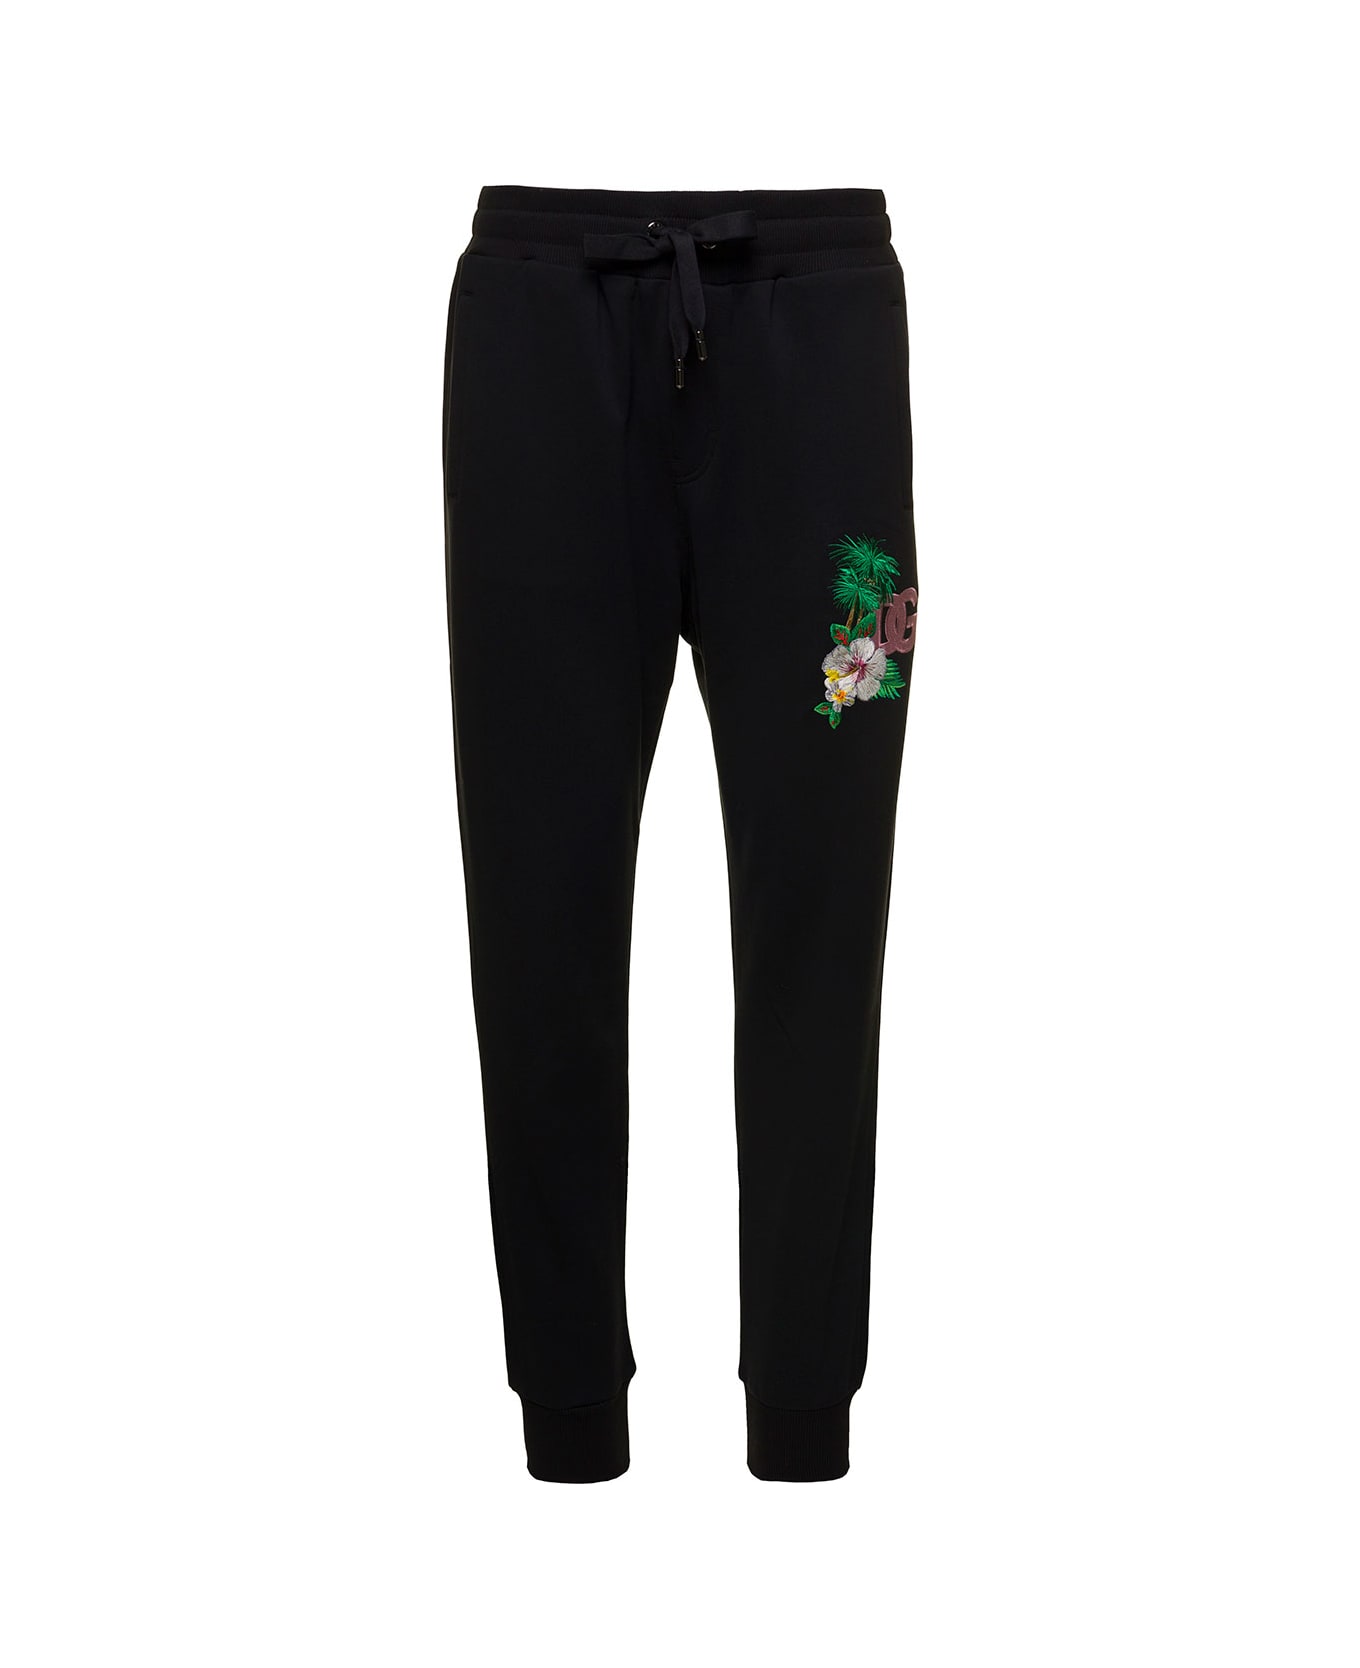 Dolce & Gabbana 'hawaii' Black Jogger Pants With Embroidery And Logo Patch Man Dolce & Gabbana - Black